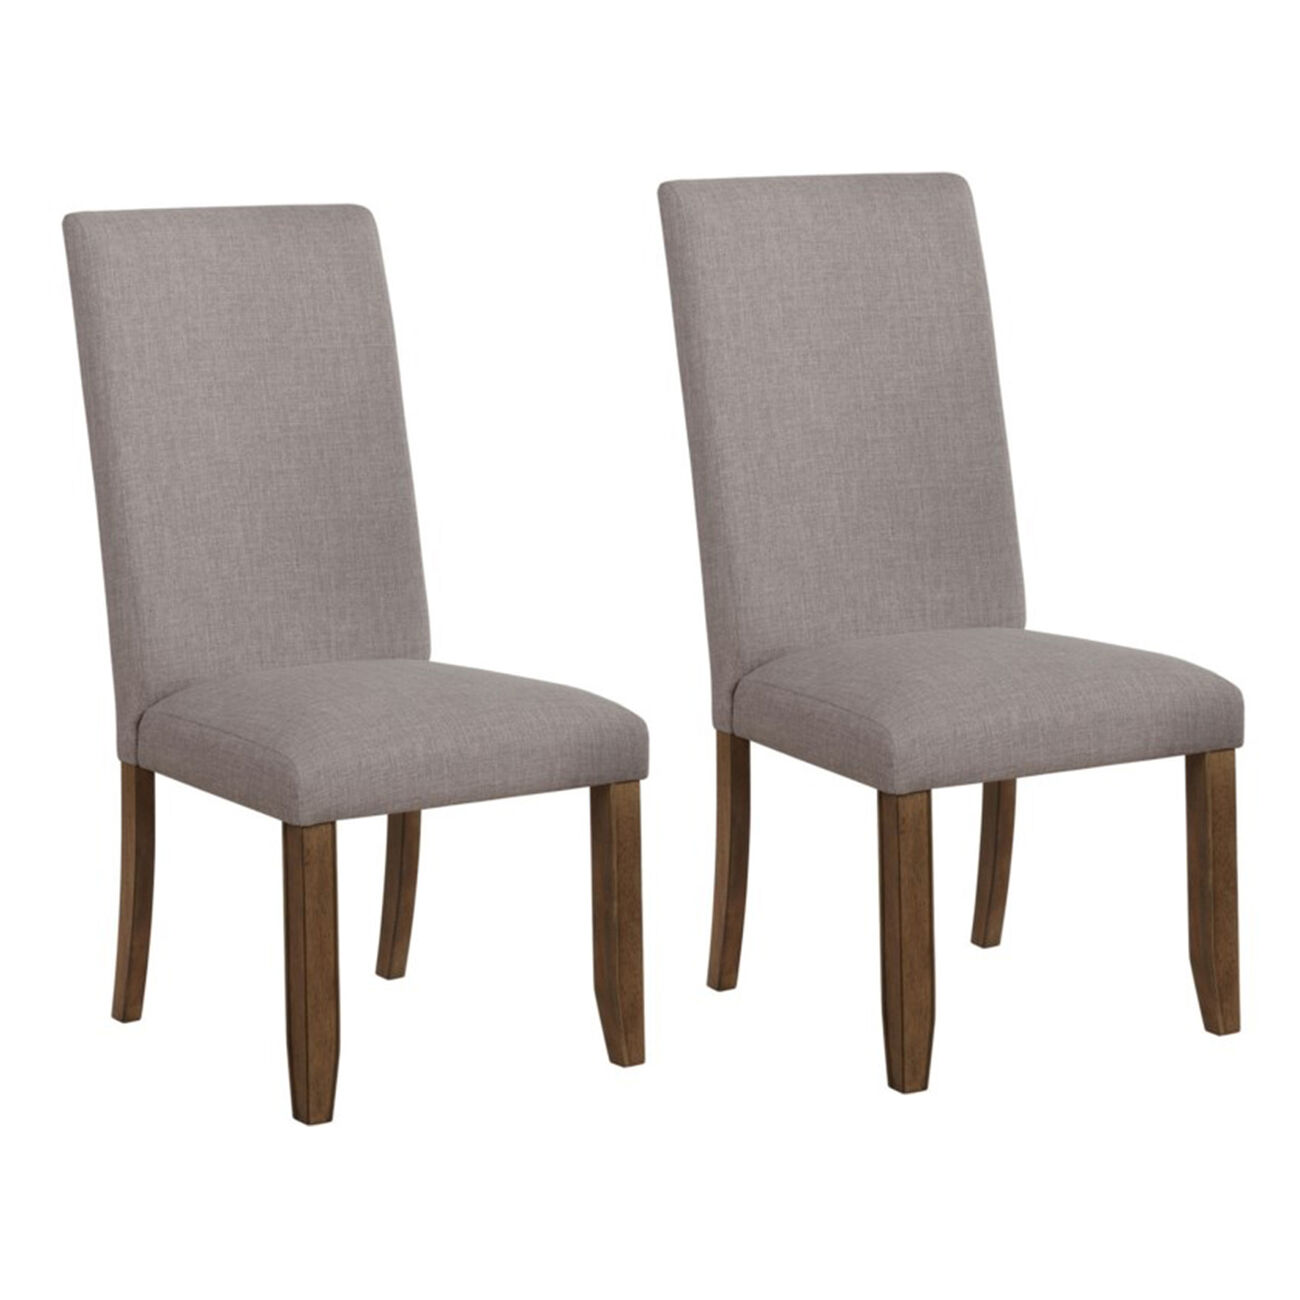 Fabric Upholstered Dining Chair, Set of 2, Brown and Gray